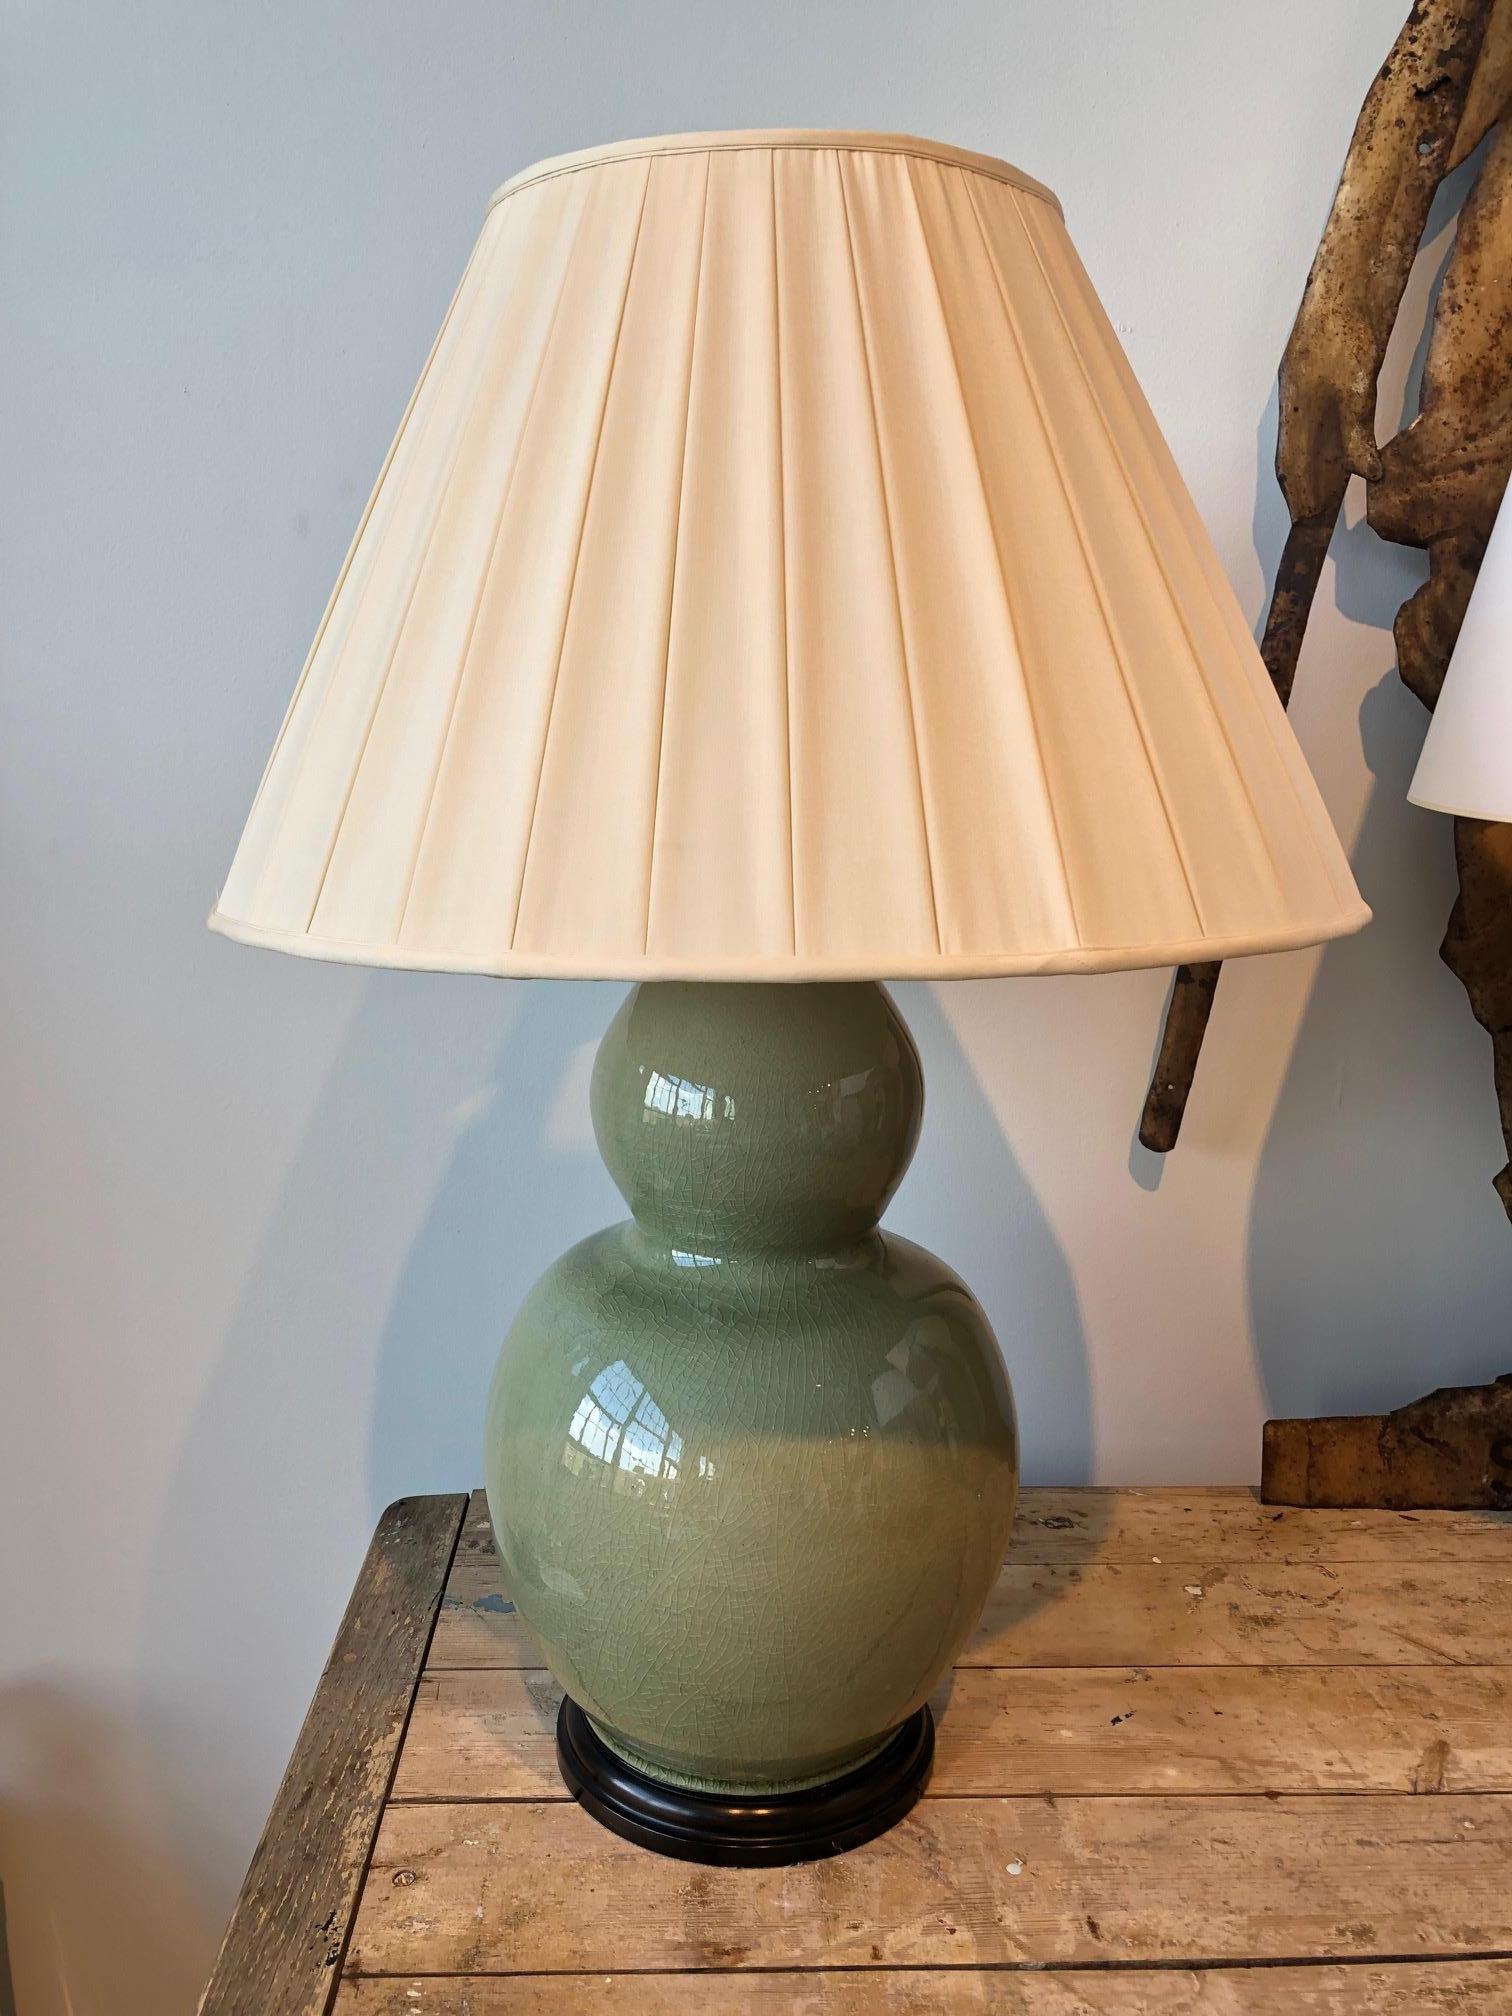 Chinese Celadon double gourd lamp, circa 1860. With silk pleated shade.